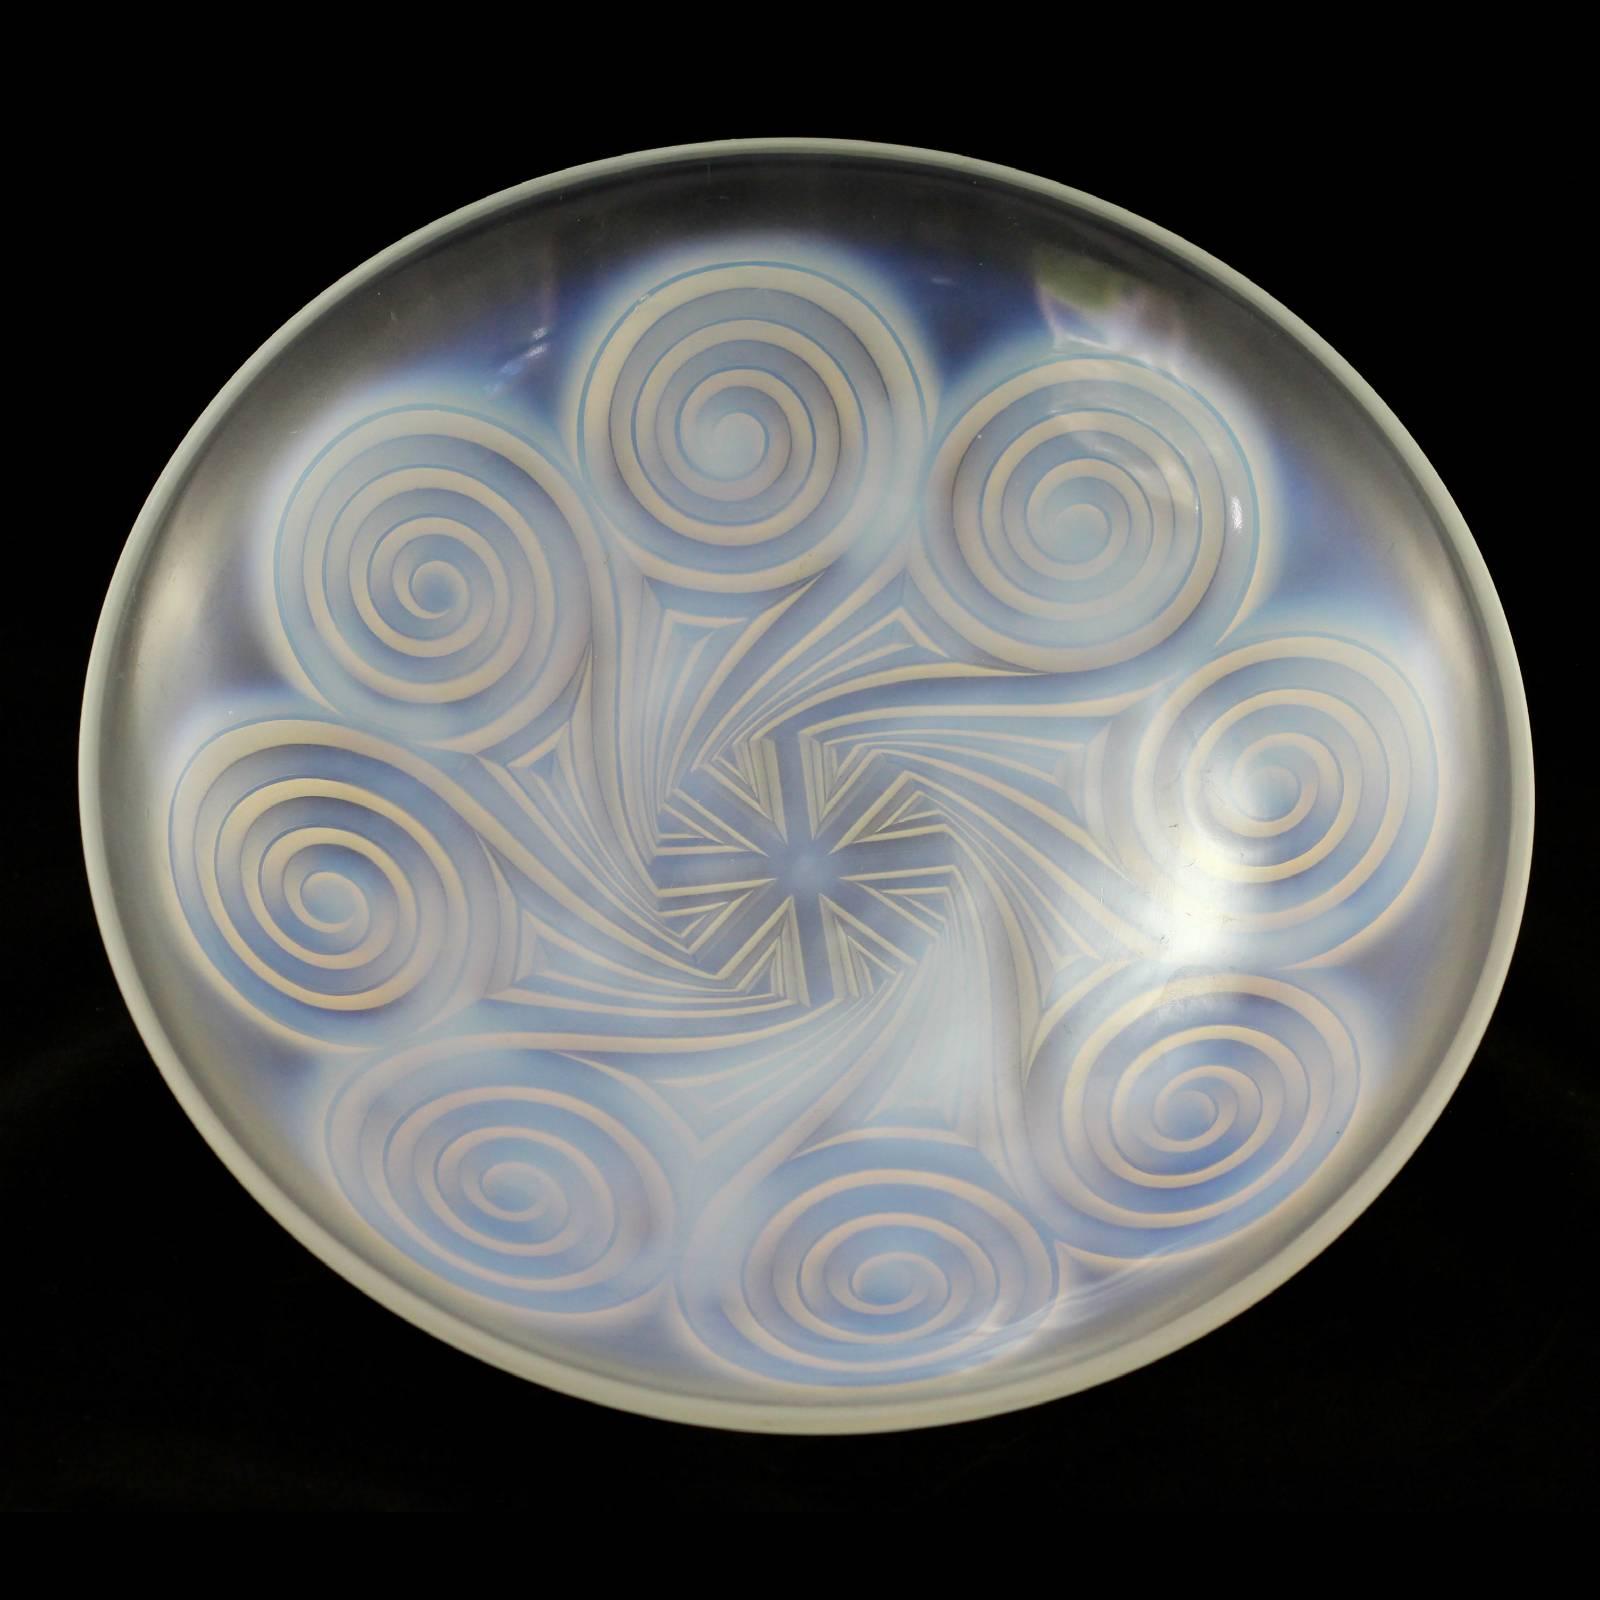 A large flat 20th century Art Deco opalescent glass bowl with swirl pattern by Edmond Etling.